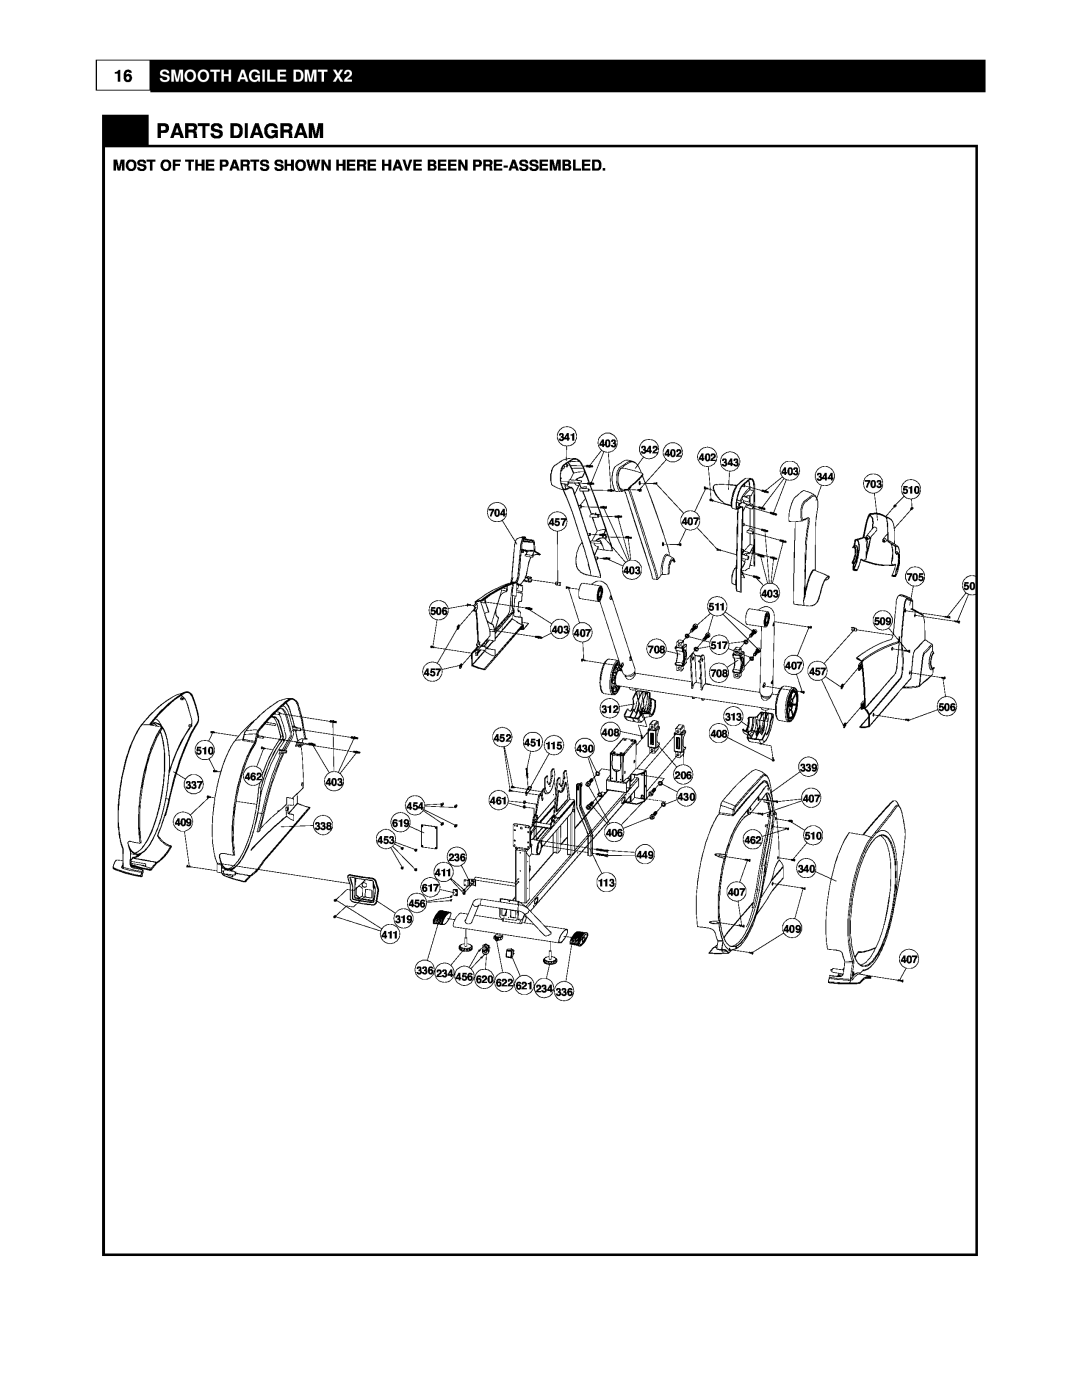 Smooth Fitness DMT X2 user manual Parts Diagram, Smooth Agile Dmt 